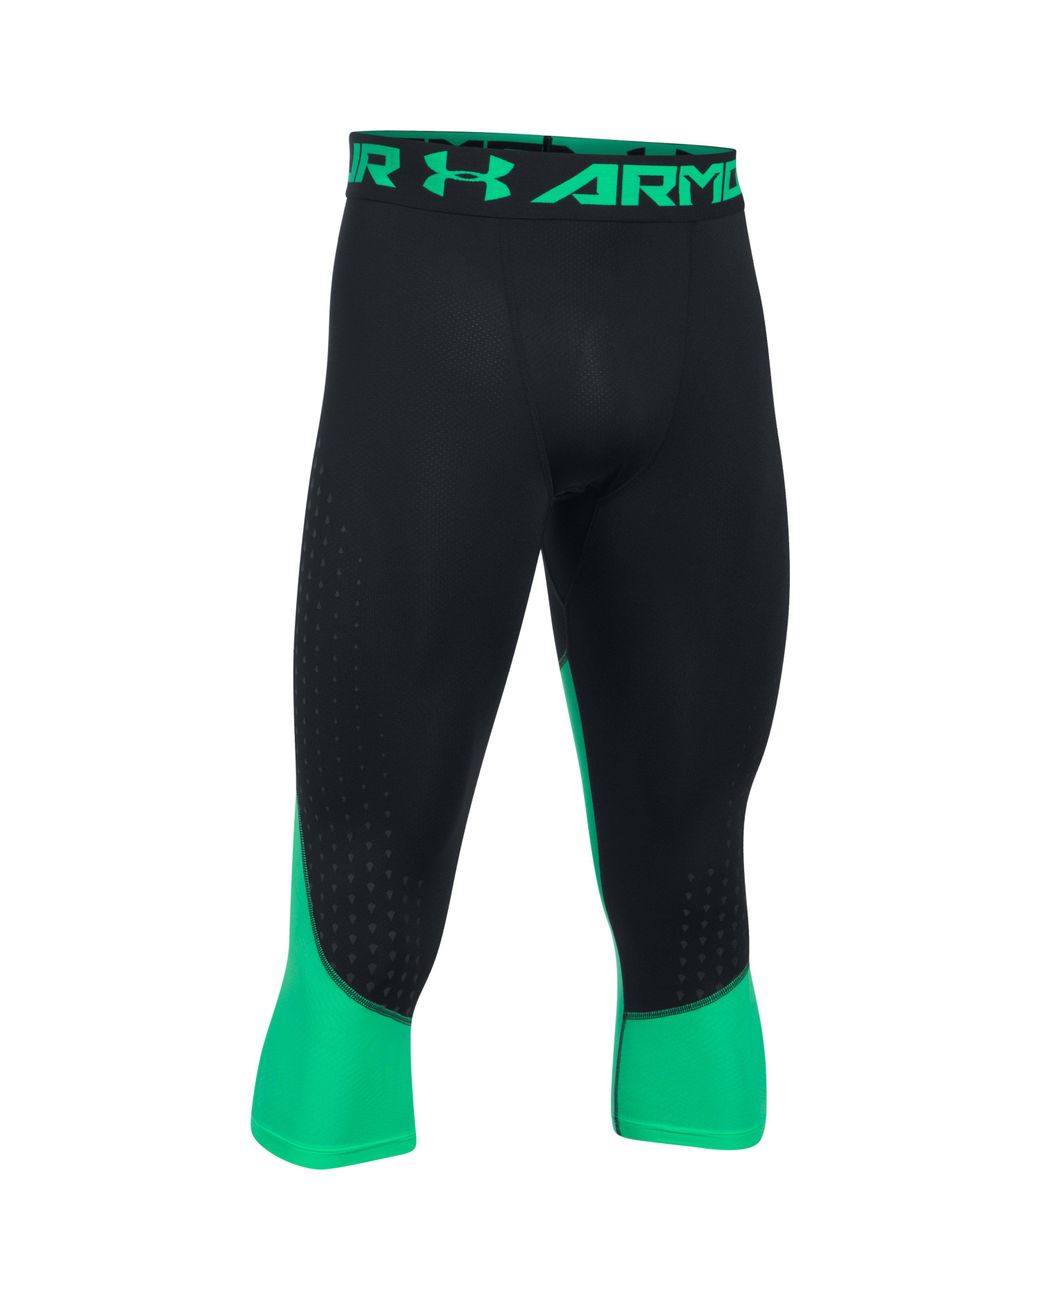 Under Armour Men's Heatgear® Coolswitch Armour 3⁄4 Compression